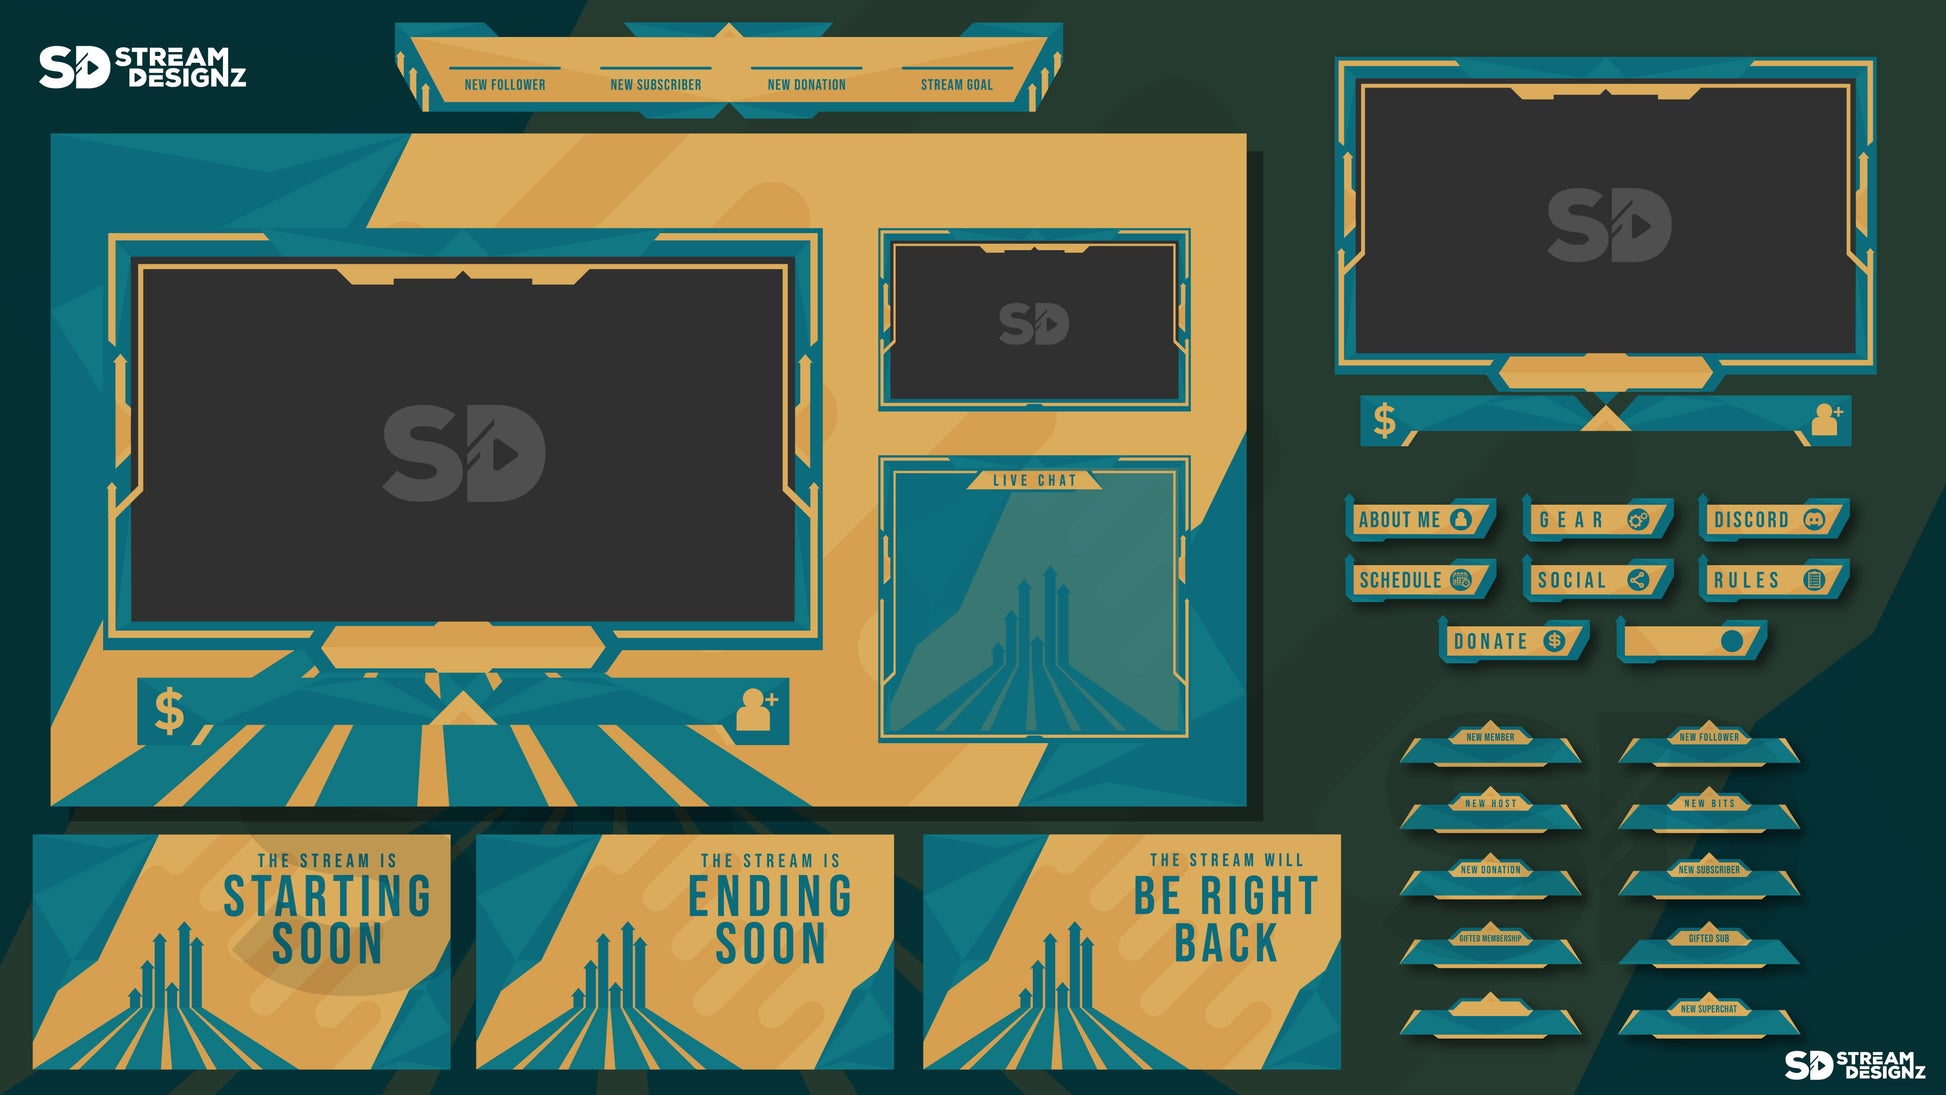 animated stream overlay package on the rise feature image stream designz